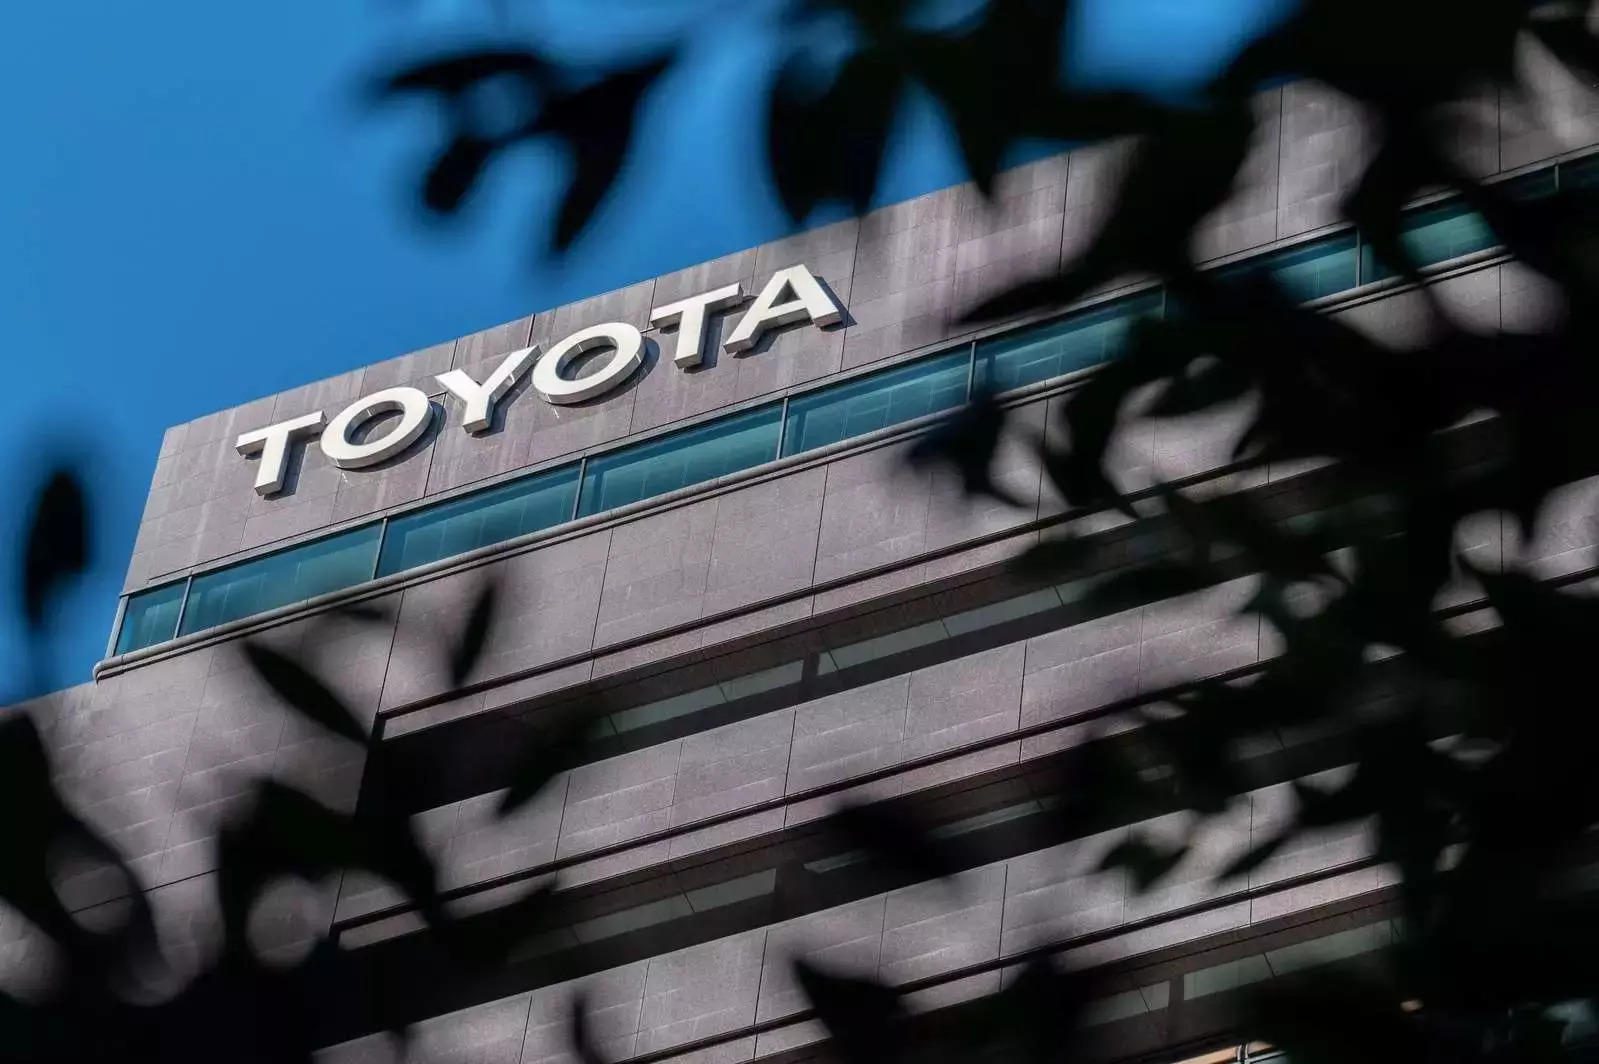  The new Toyota plan is also focused on intelligent cars and technology.